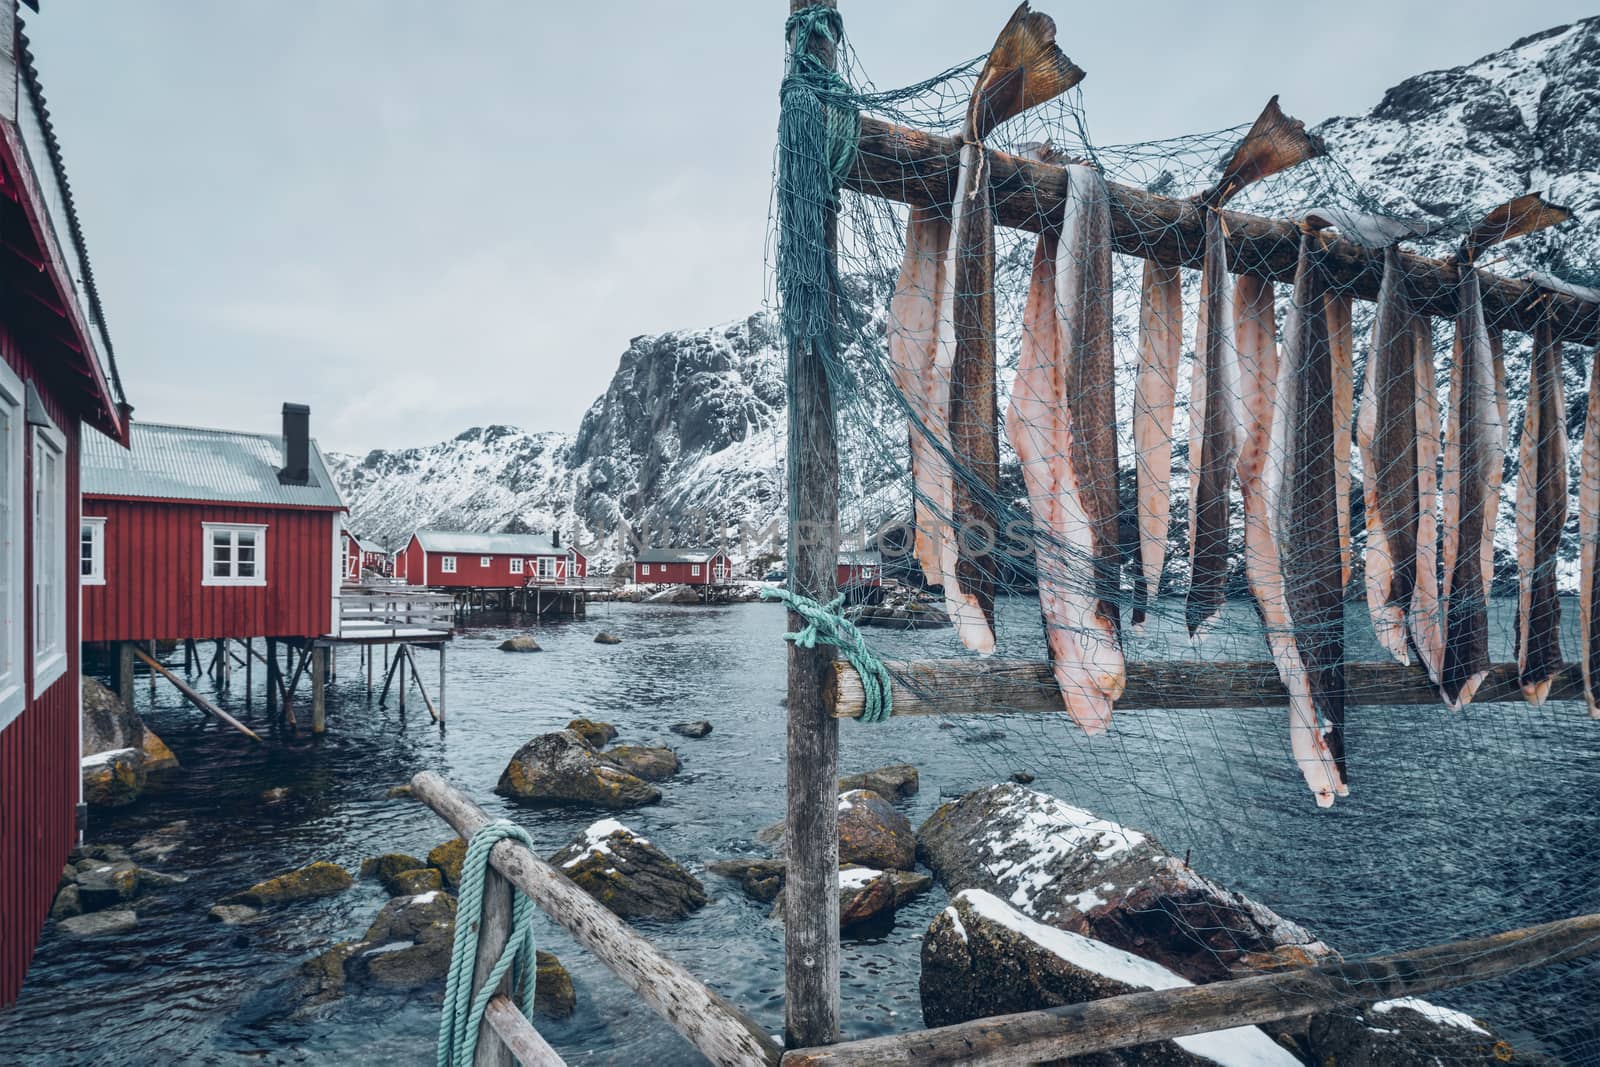 Drying stockfish cod in Nusfjord authentic traditional fishing village with traditional red rorbu houses in winter in Norwegian fjord. Lofoten islands, Norway